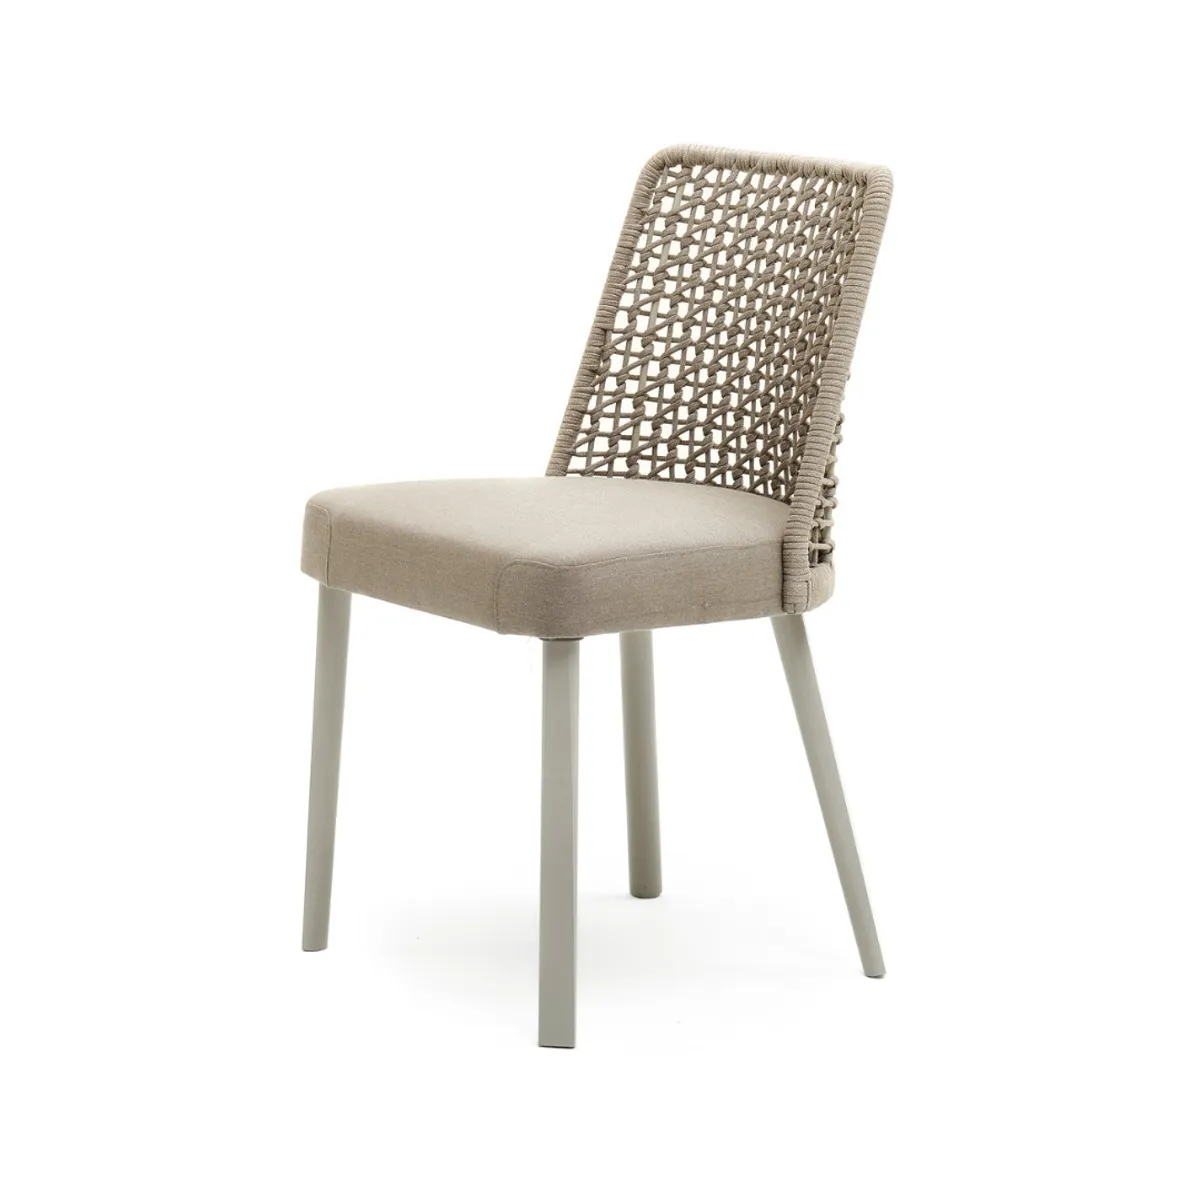 Emma outdoor side chair